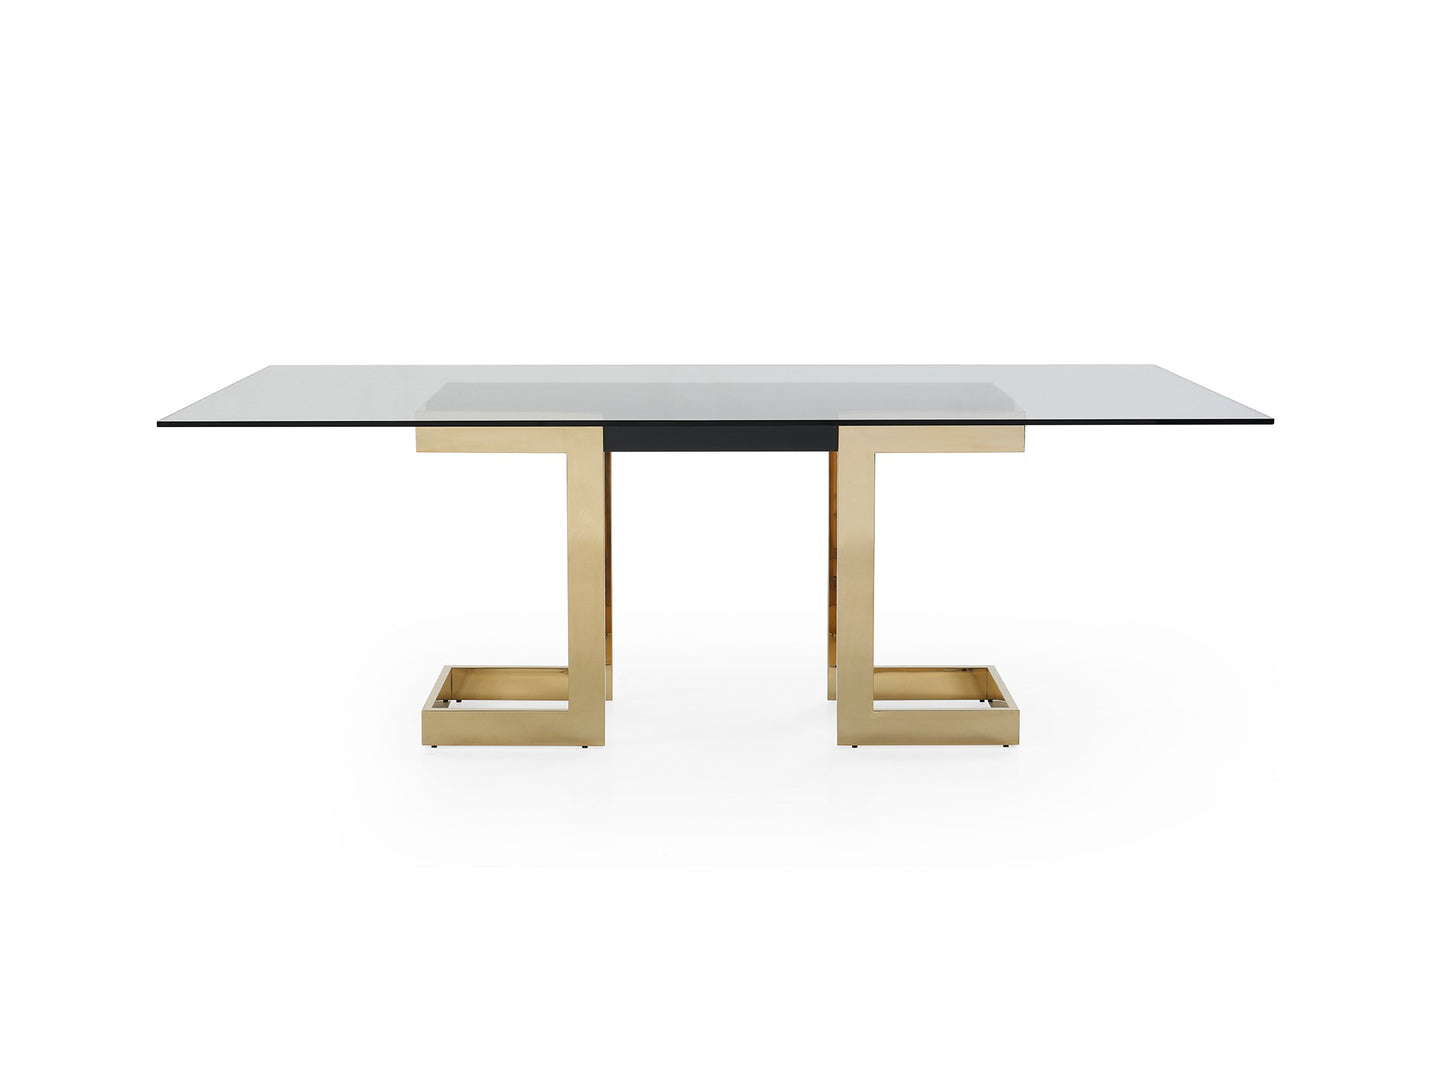 Load image into Gallery viewer, Sumo Rectangle Dining Table Dining Table Whiteline     Four Hands, Burke Decor, Mid Century Modern Furniture, Old Bones Furniture Company, Old Bones Co, Modern Mid Century, Designer Furniture, https://www.oldbonesco.com/
